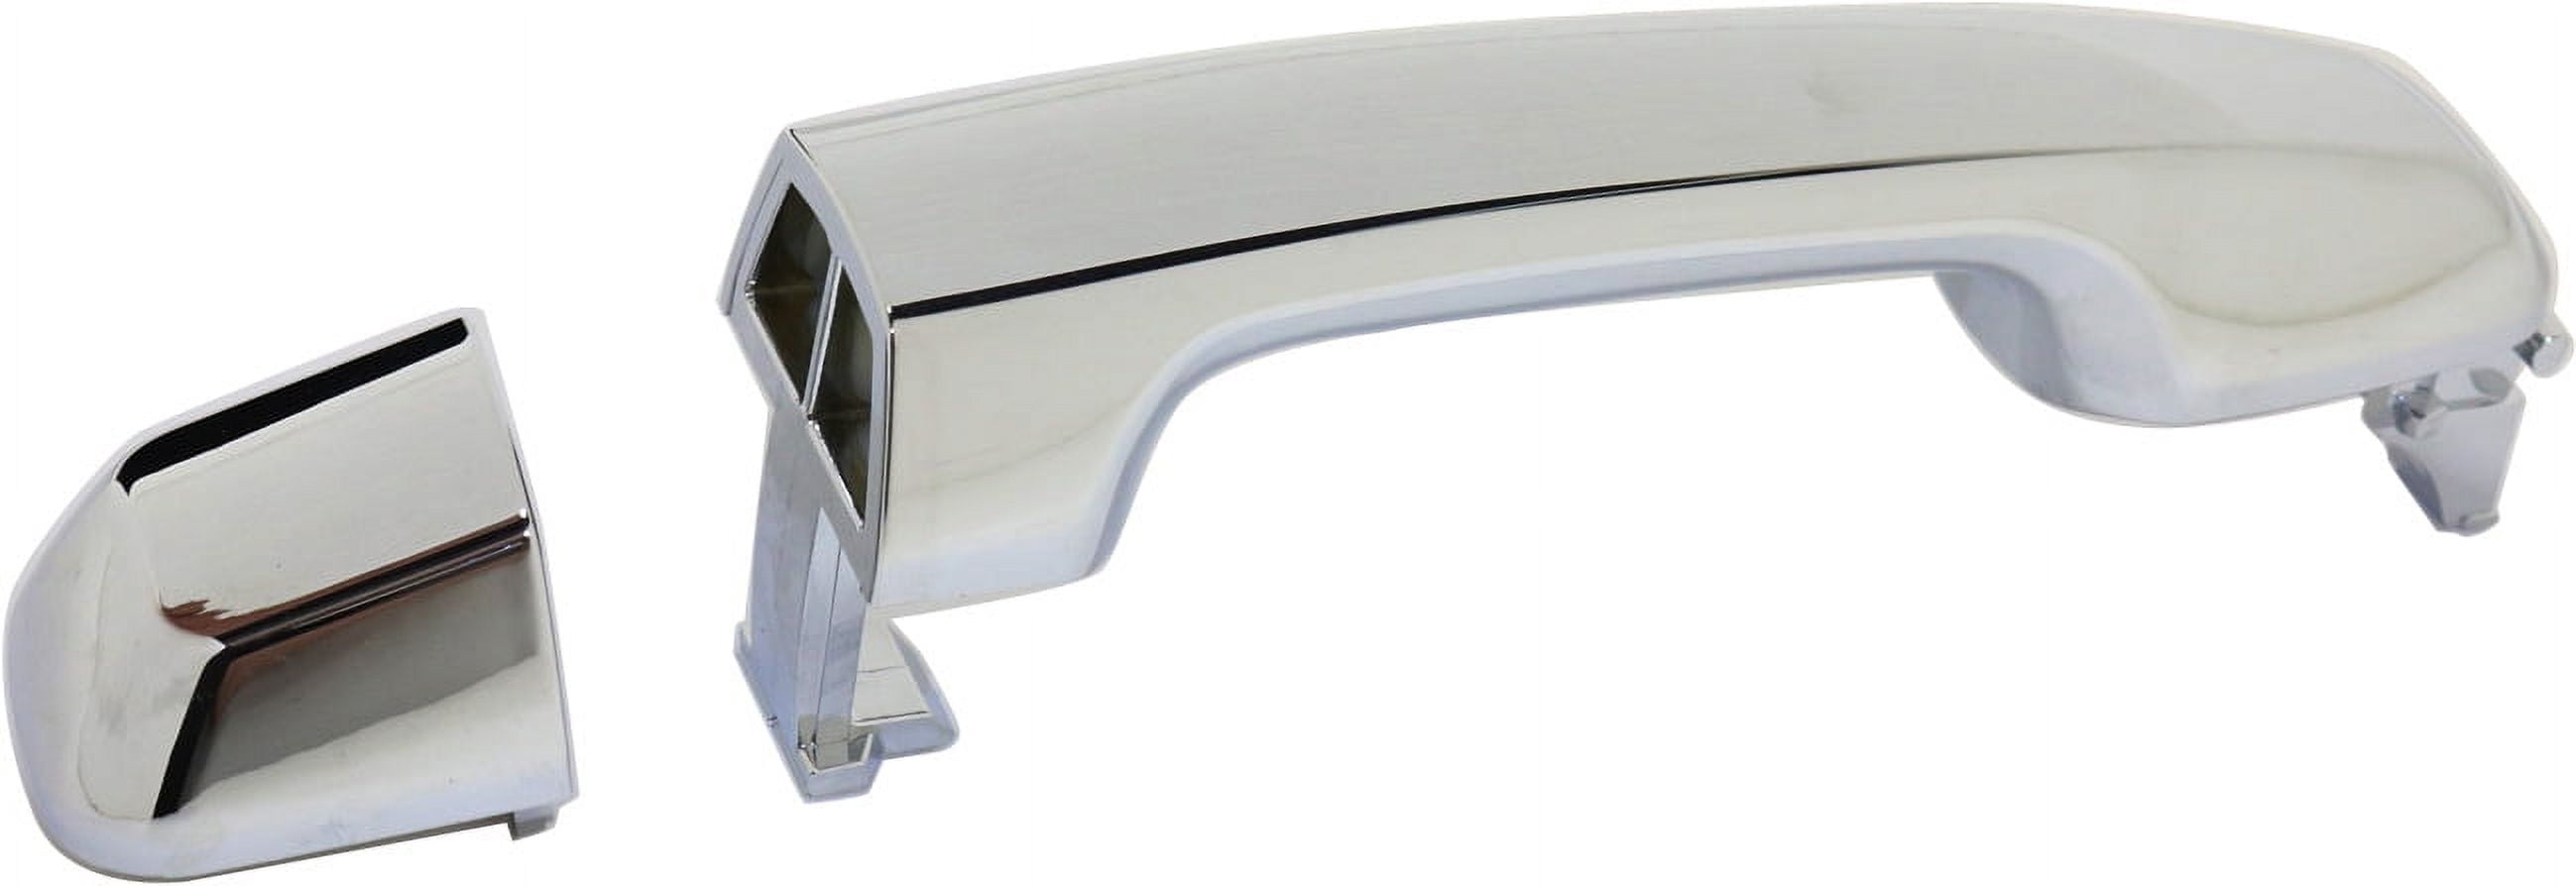 Replacement REPT494727 Exterior Door Handle Compatible with 2010-2020  Toyota 4Runner 2010-2018 Lexus GX460 Rear, Left Driver or Right Passenger  Chrome